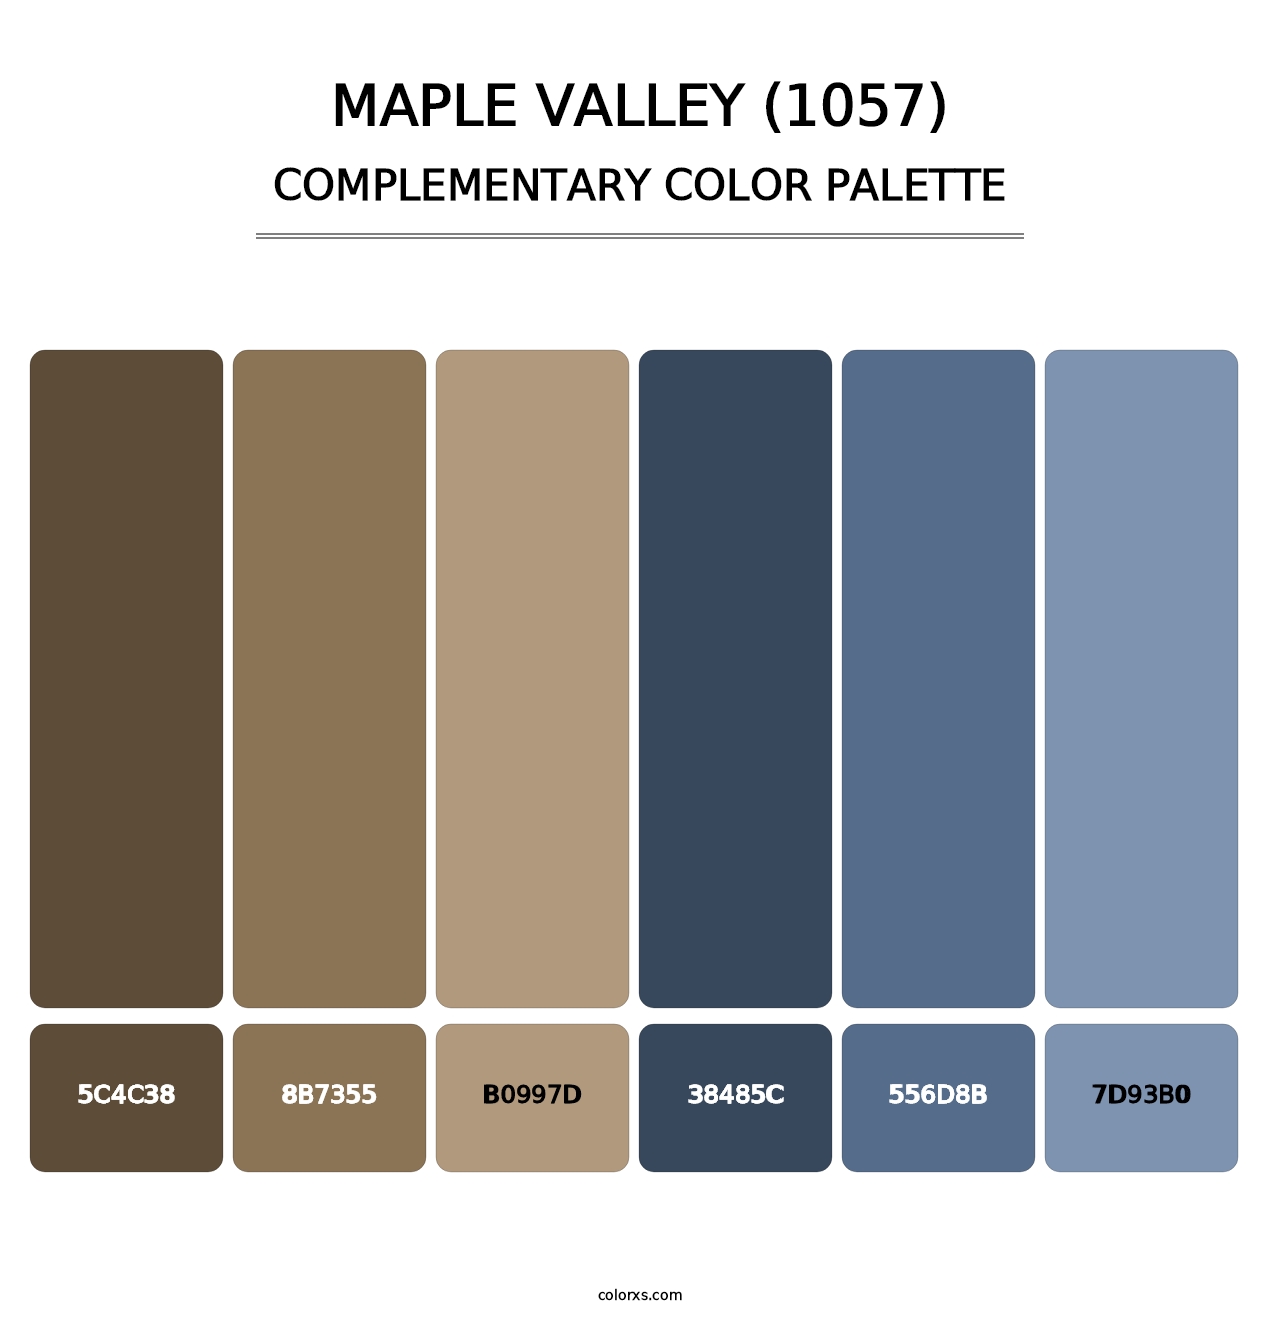 Maple Valley (1057) - Complementary Color Palette